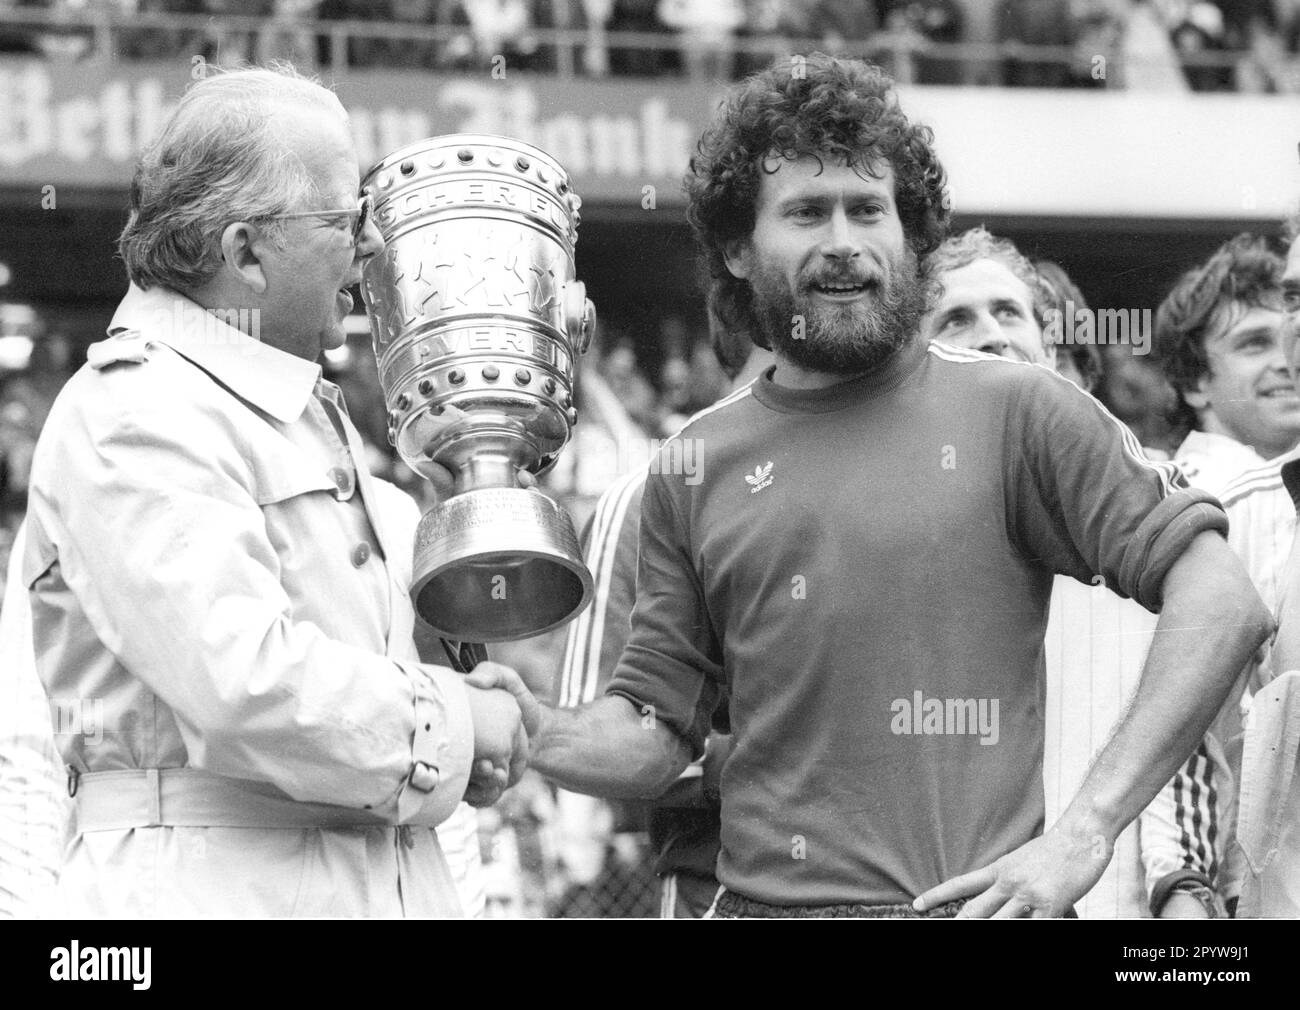 DFB Cup final FC Bayern Muenchen - 1. FC Nuernberg 4:2 /01.05.1982/ DFB President Hermann Neuberger presents the cup to Paul Breitner (FC Bayern) [automated translation] Stock Photo